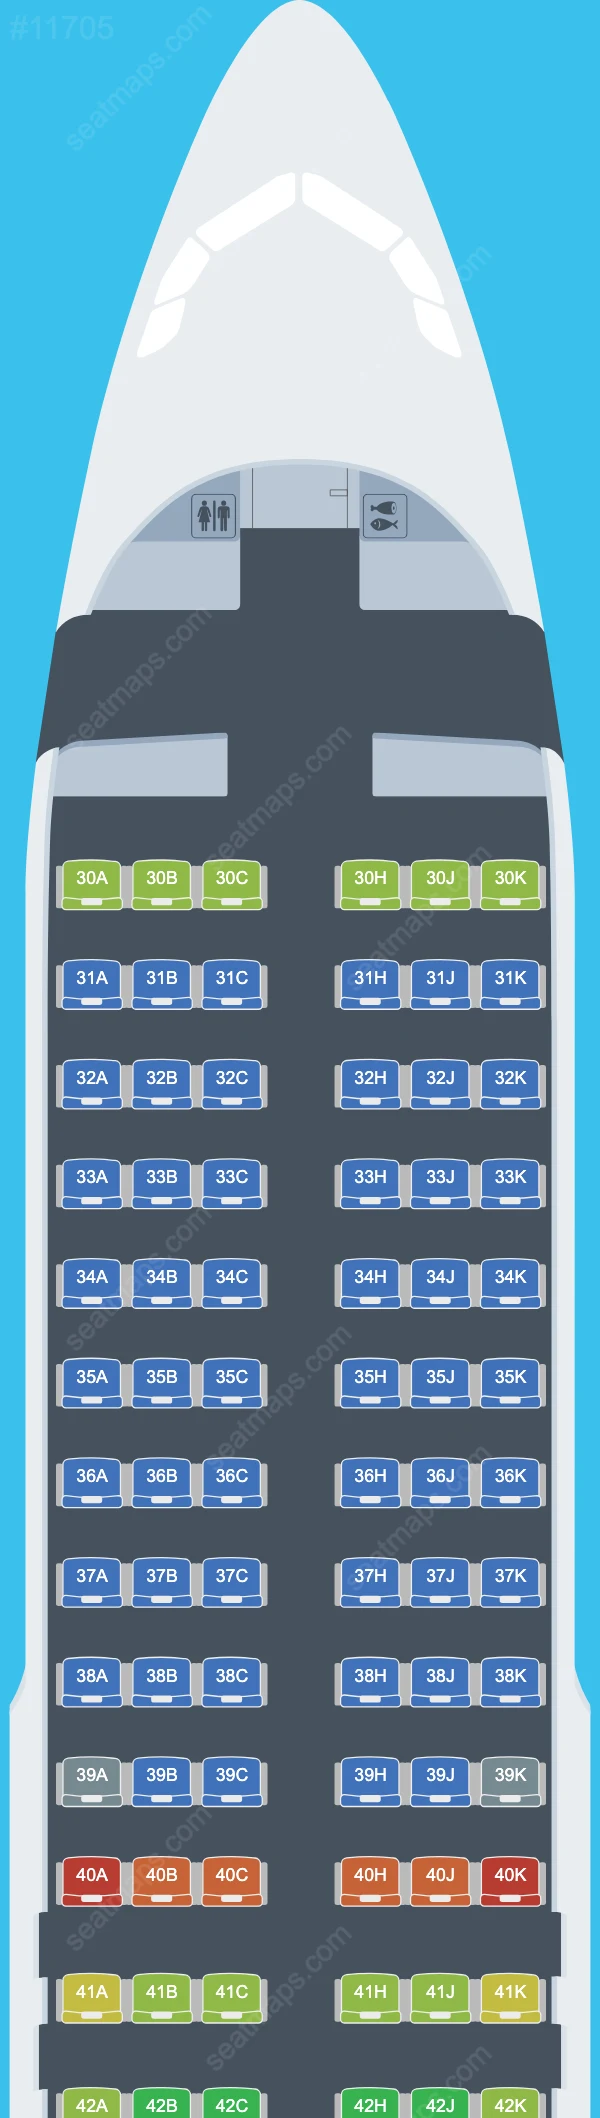 Sichuan Airlines Airbus A320neo V.1 seatmap preview